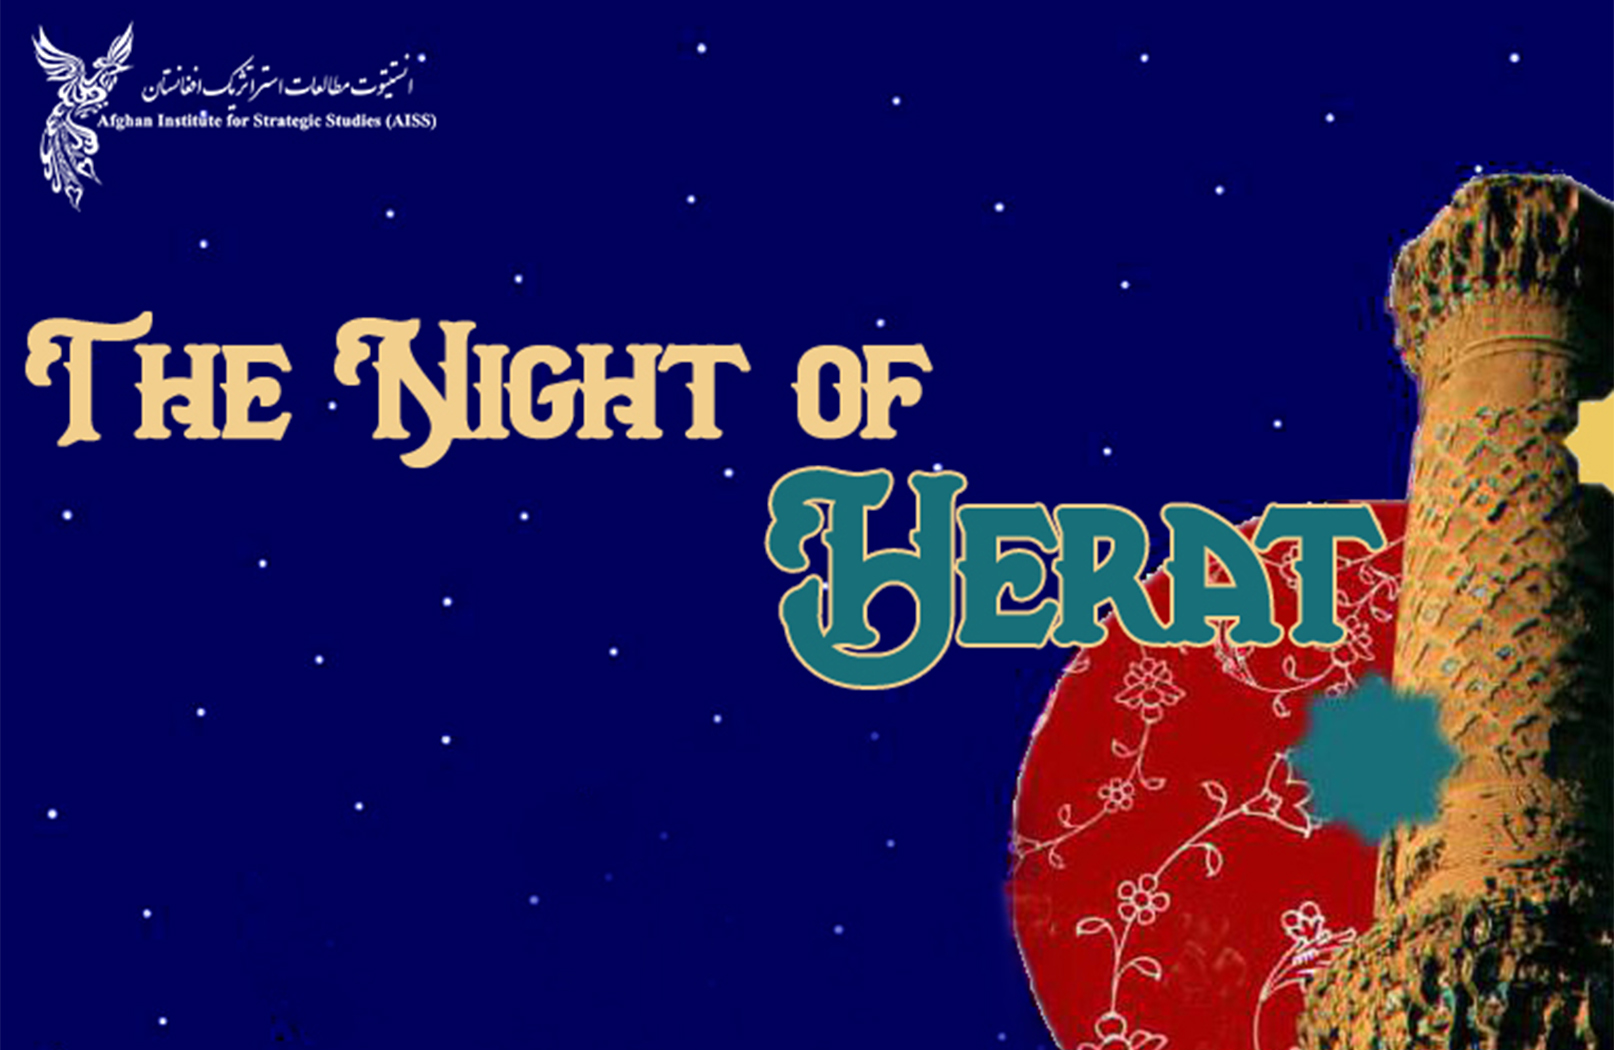 <p><strong>Ezzatollah Zarghami, the Minister of Cultural Heritage, Handicrafts&nbsp;&amp;Tourism for the Islamic Republic of Iran<br />
Extends his message on the occasion of the Night of Herat event</strong></p>